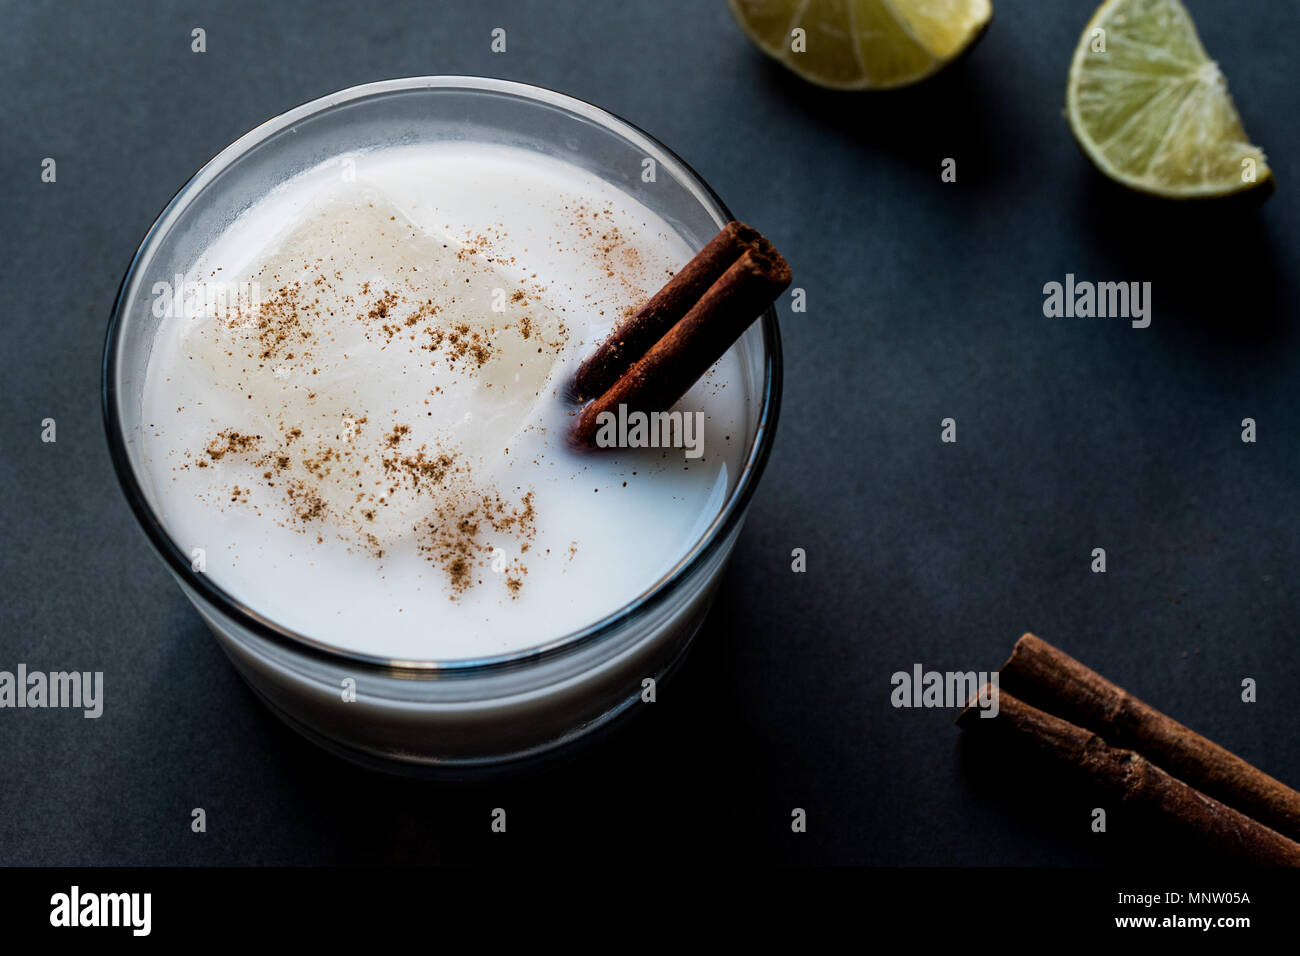 Horchata with Cinnamon stick and lime. Stock Photo